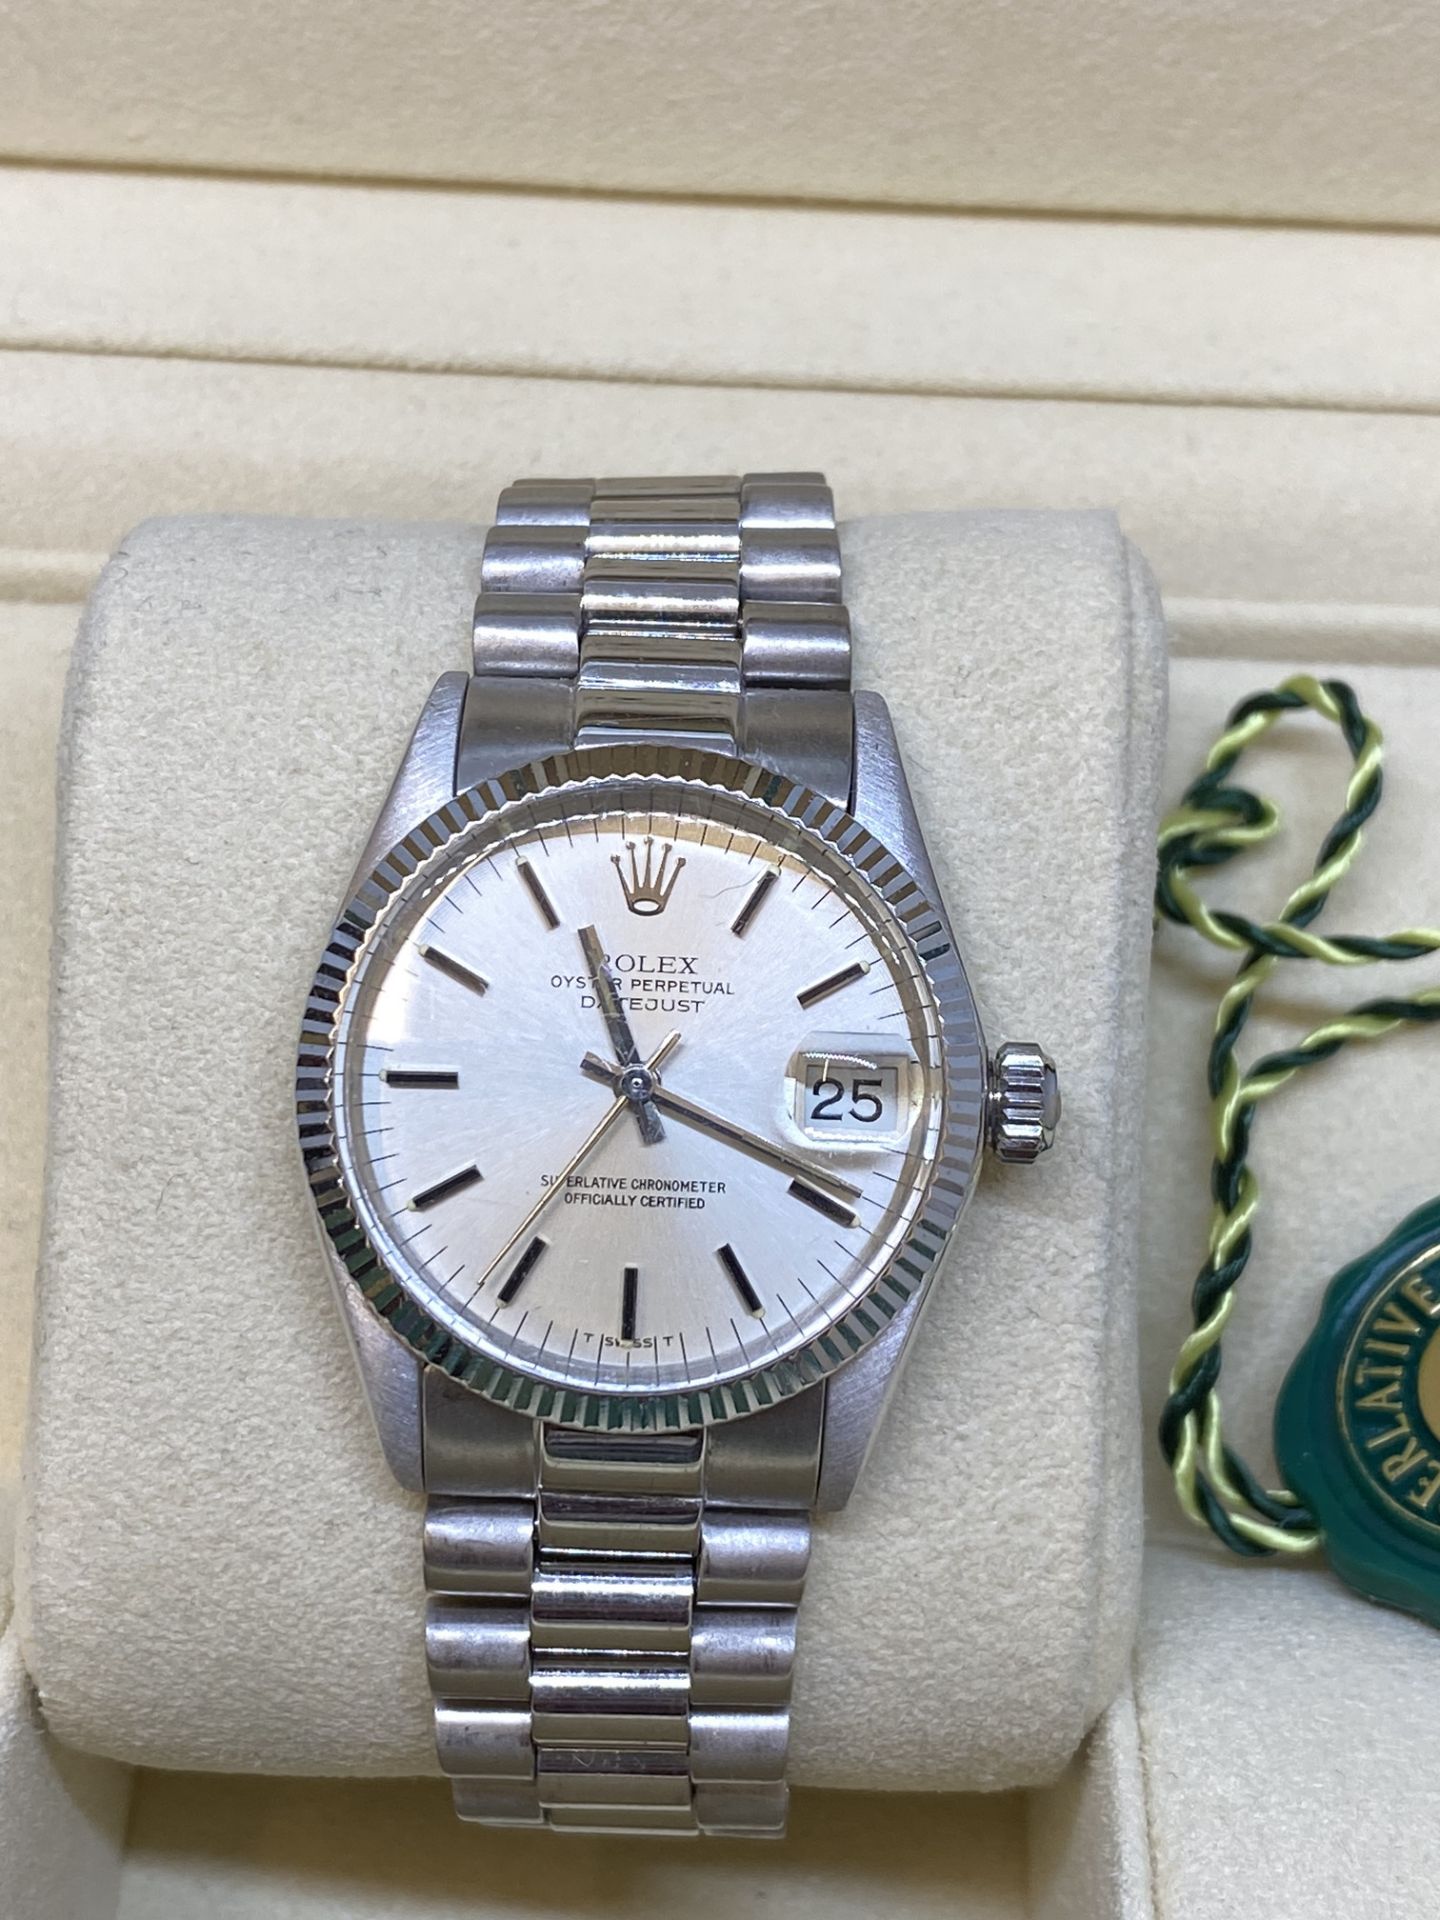 18ct Gold Rolex Watch with Box - Image 2 of 14